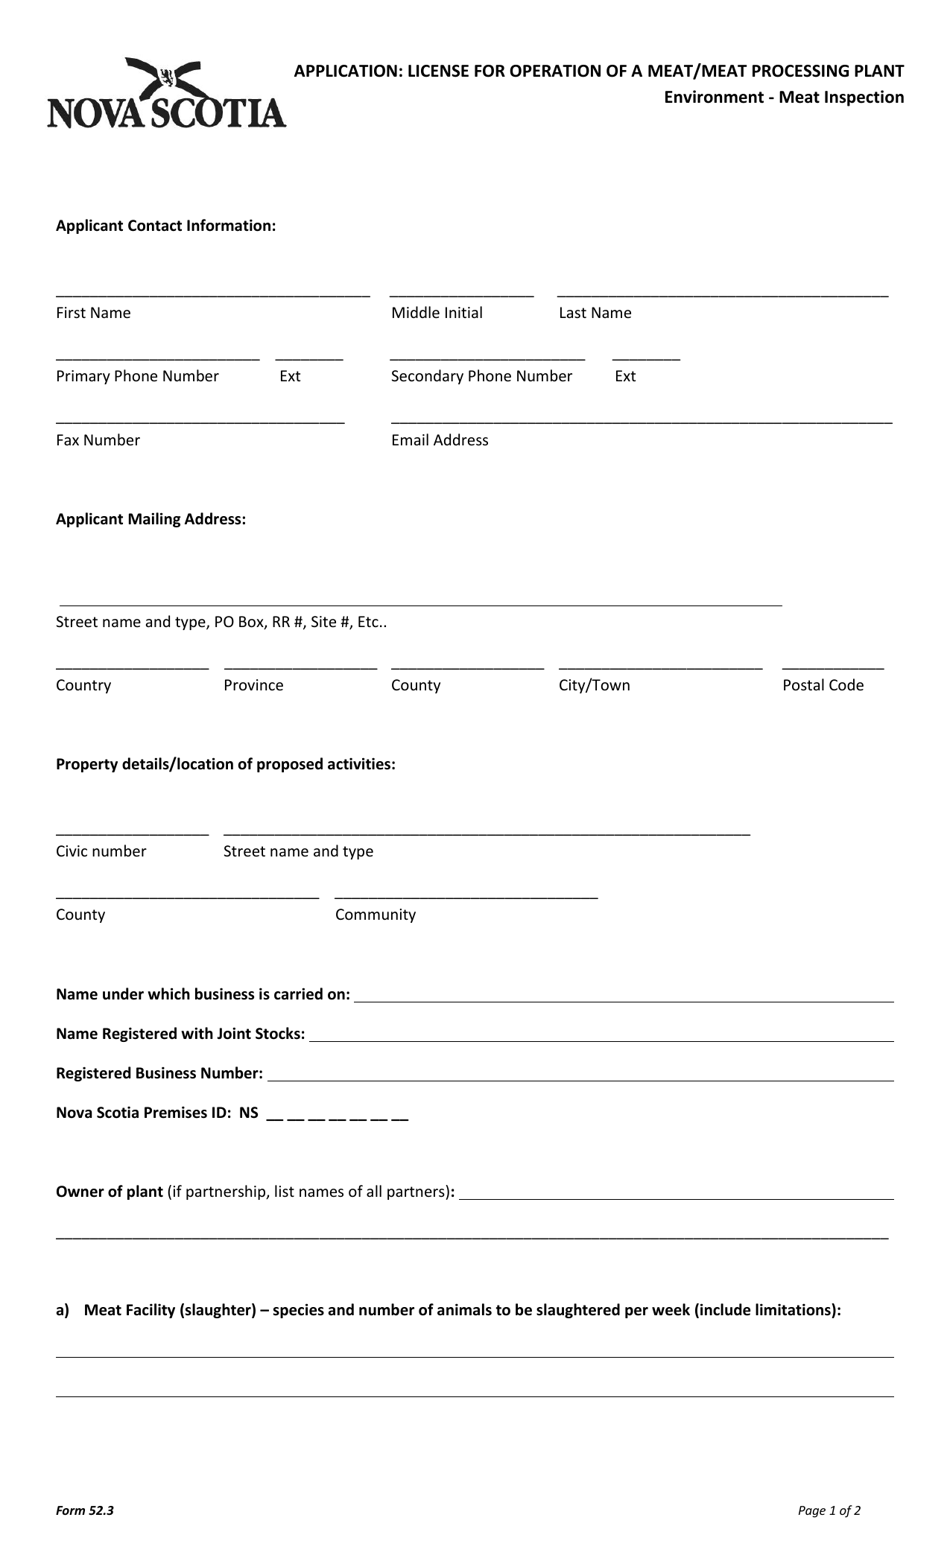 Form 52.3 Application: License for Operation of a Meat / Meat Processing Plant - Nova Scotia, Canada, Page 1